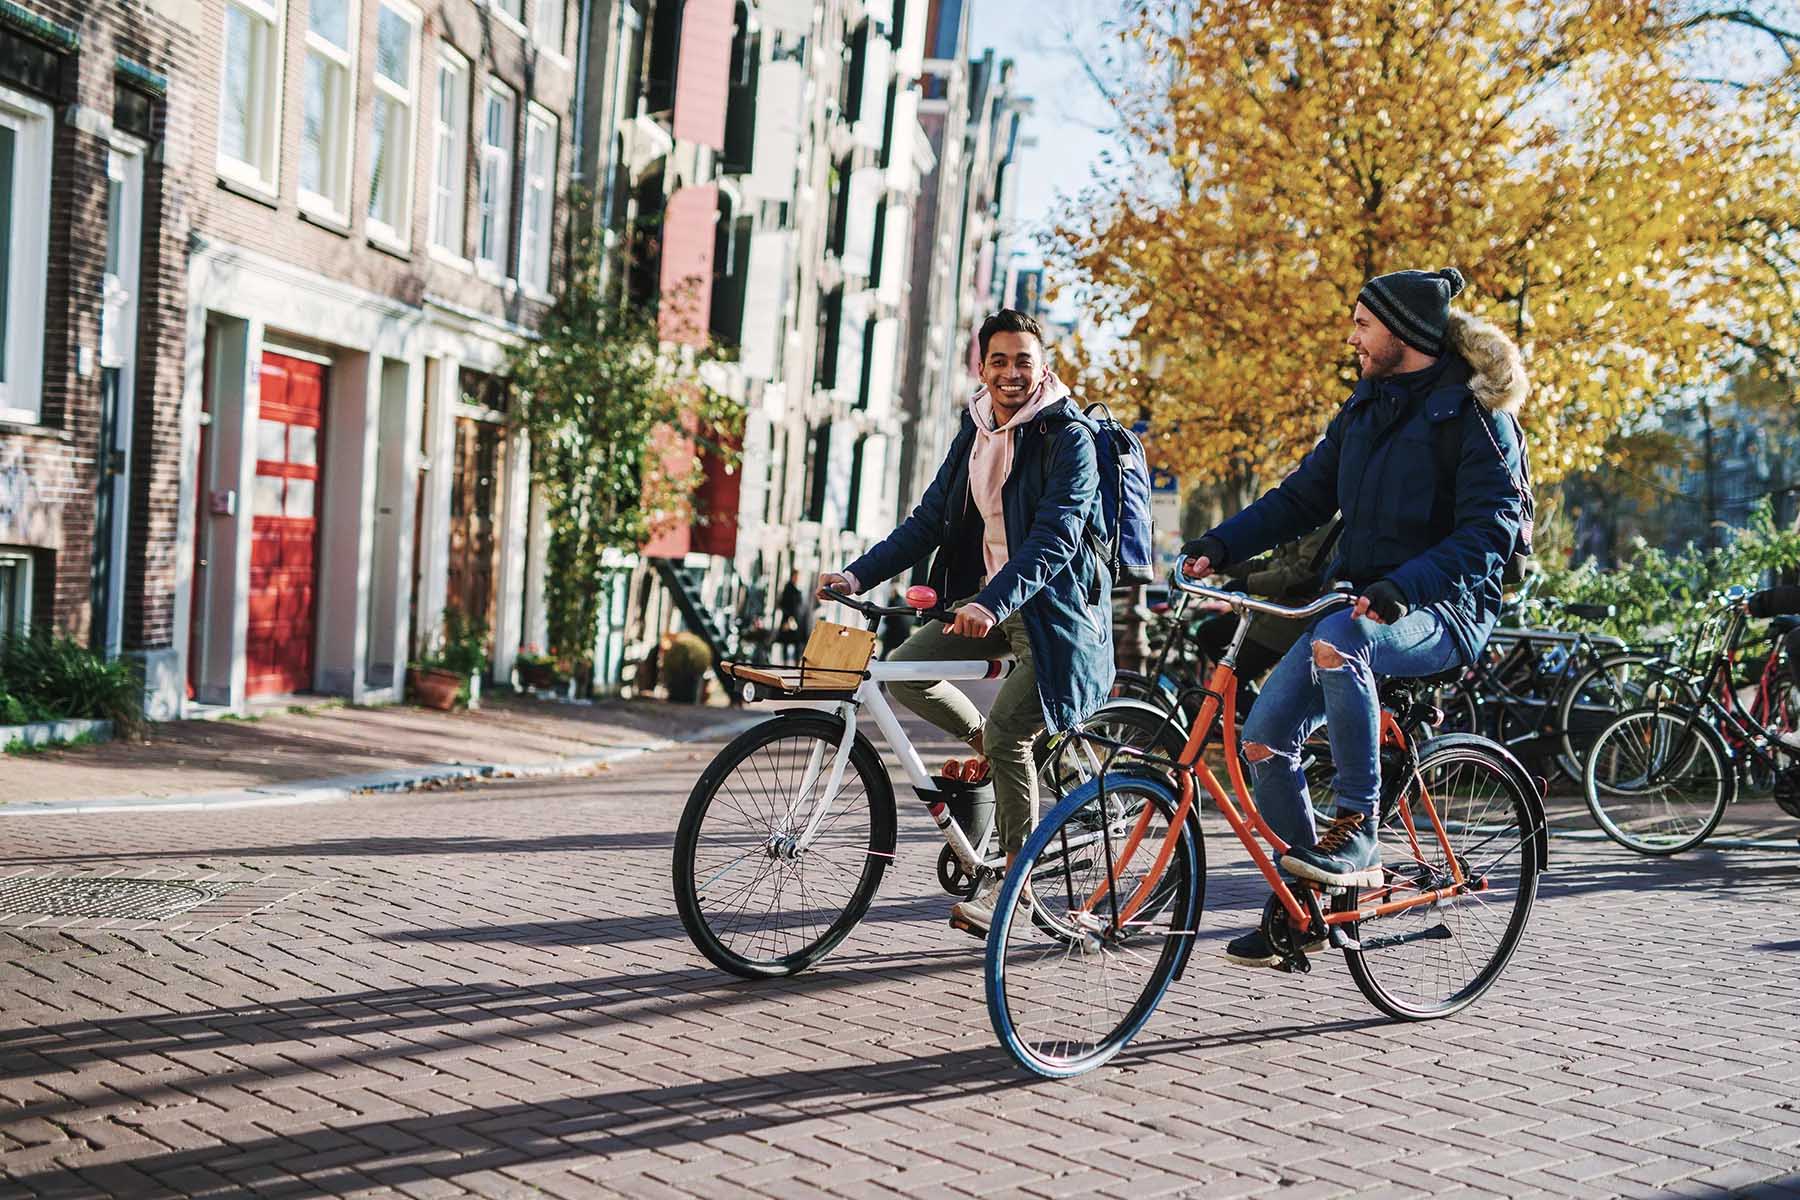 Cute couple smiling and cycling through Amsterdam on a sunny winter's day.